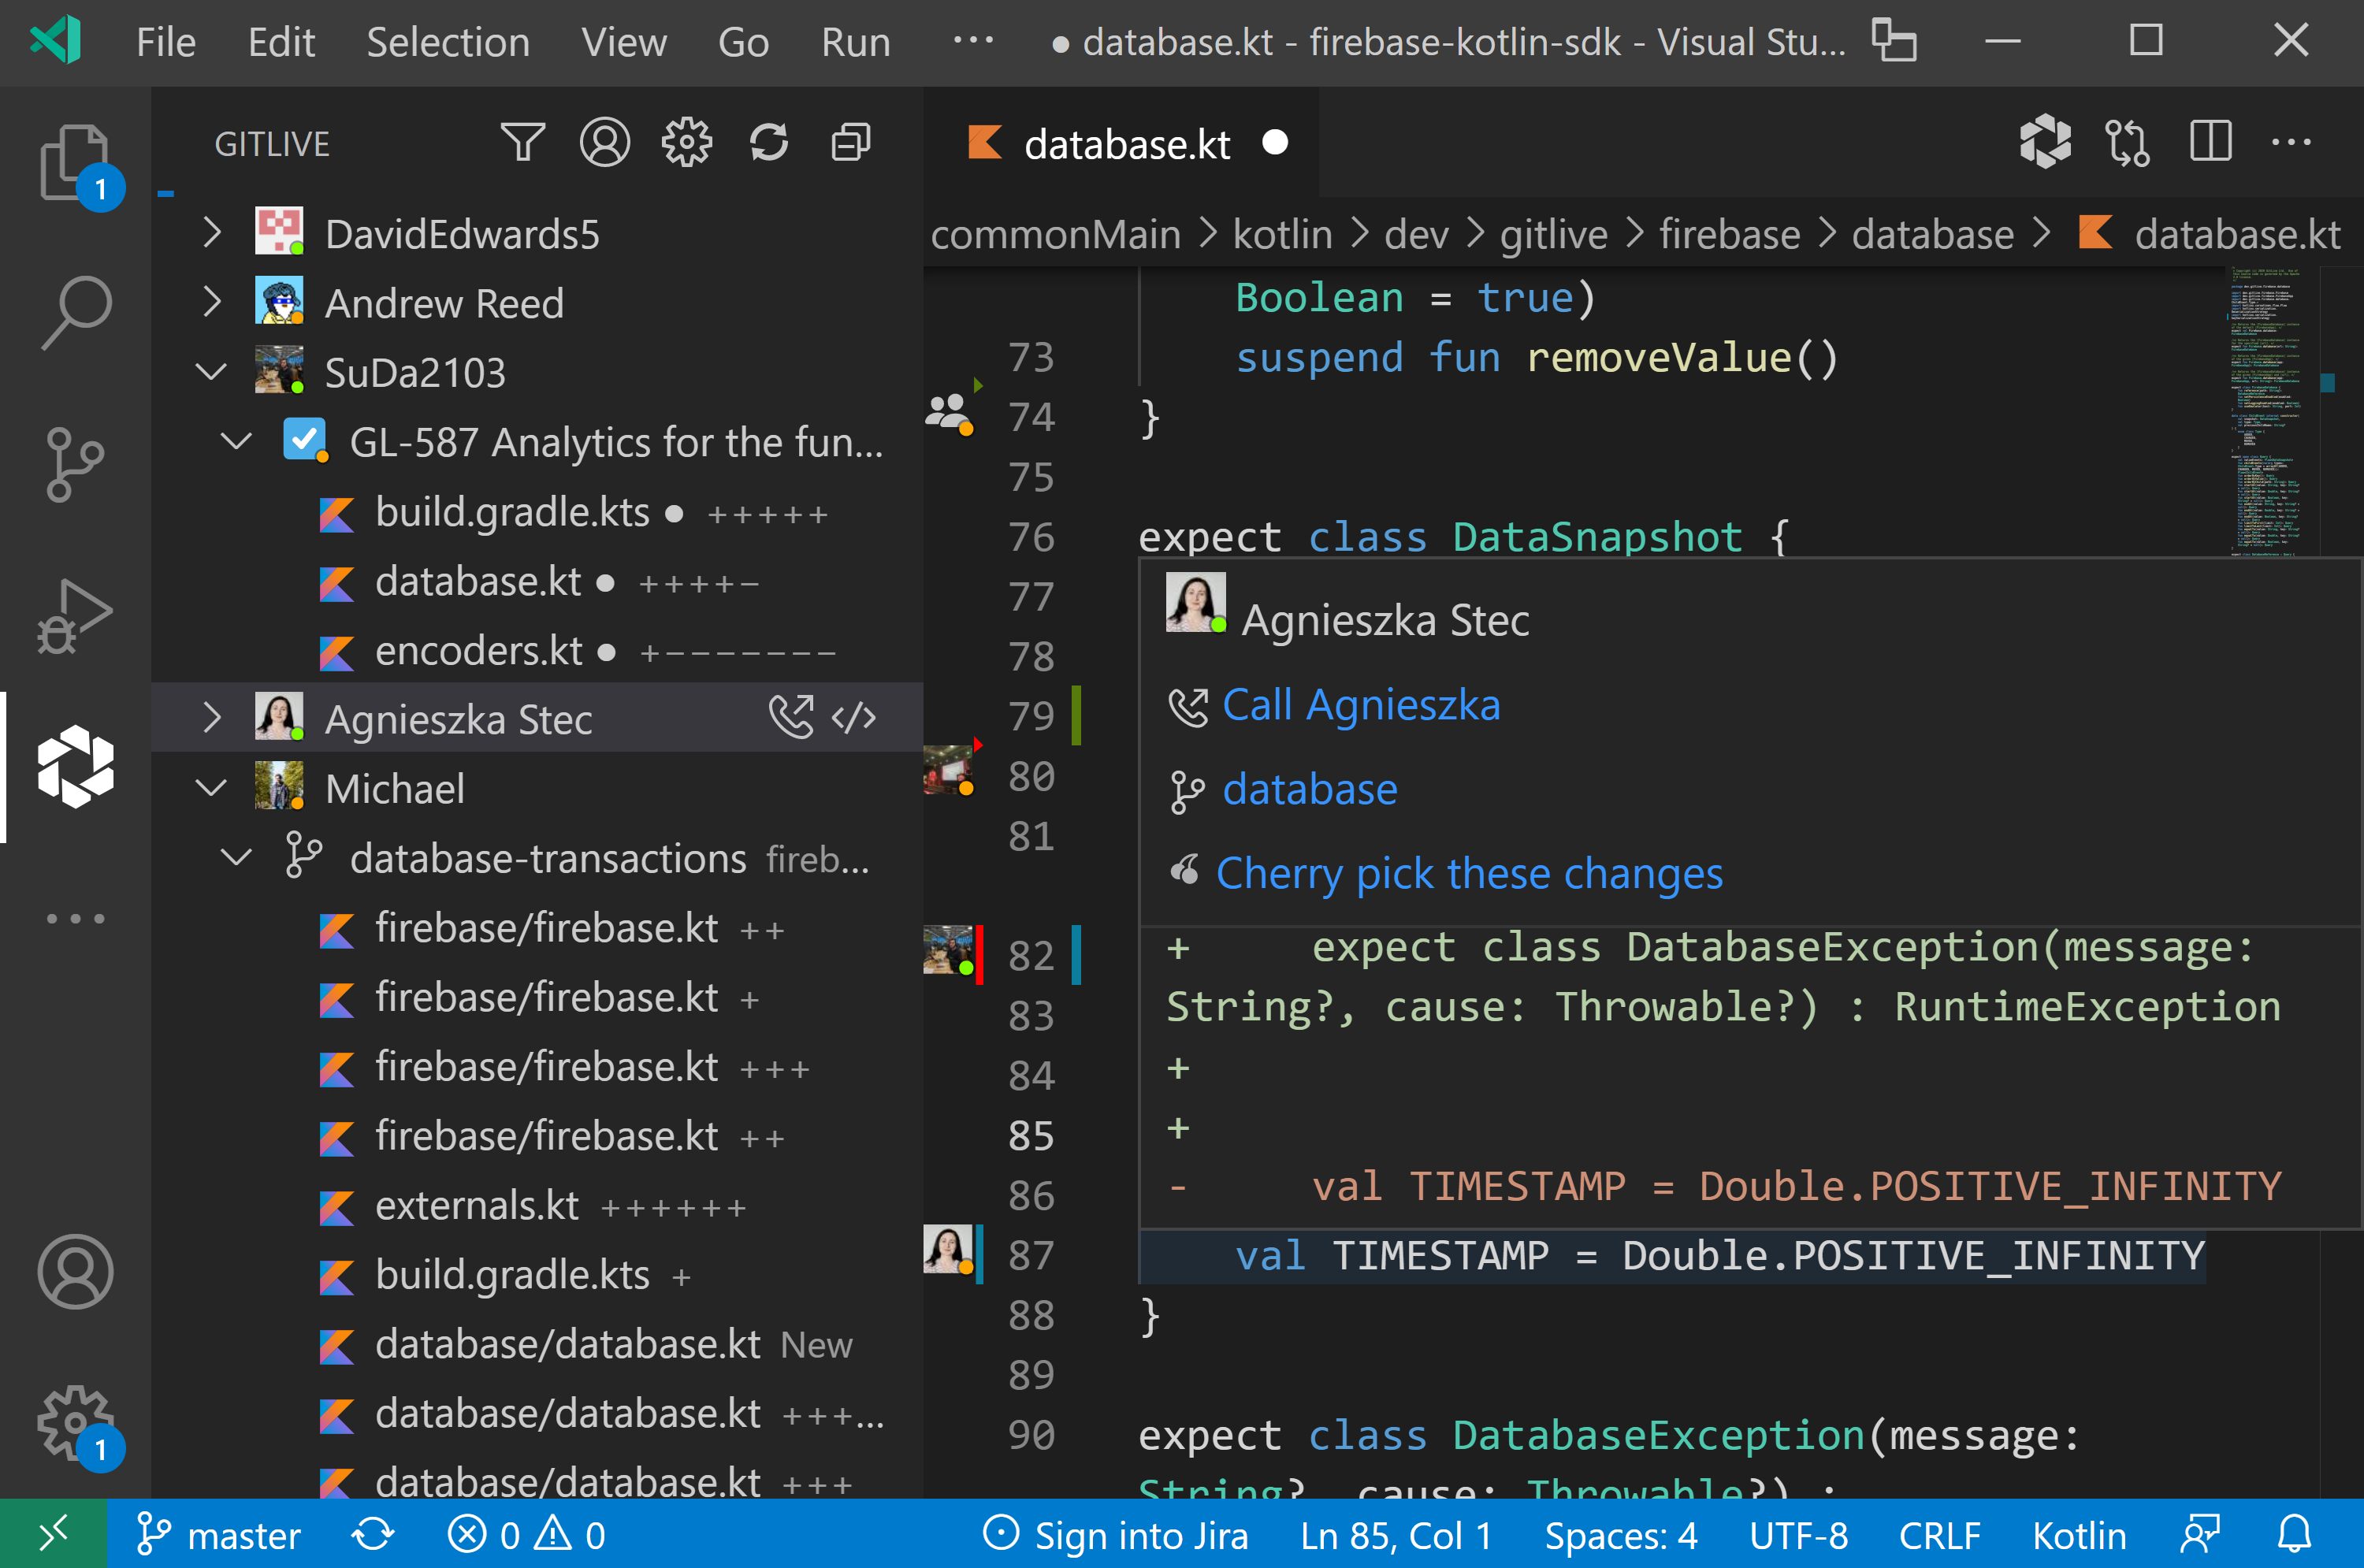 Introducing GitLive's Early Access Program for VS Code